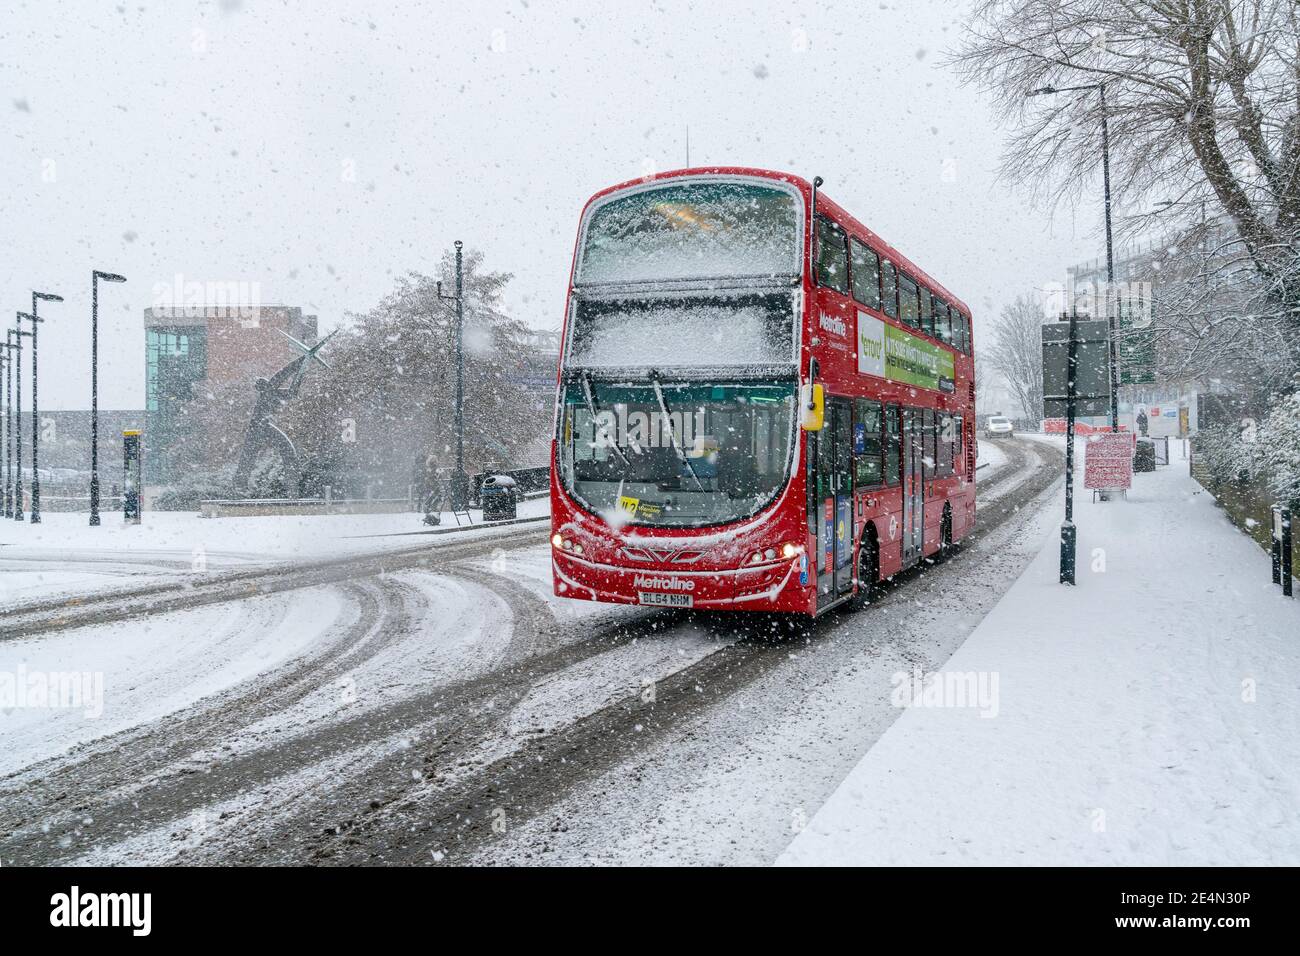 24th Jan 2021 - London, UK. A double-decker bus covered in snow in Wembley Park. Stock Photo